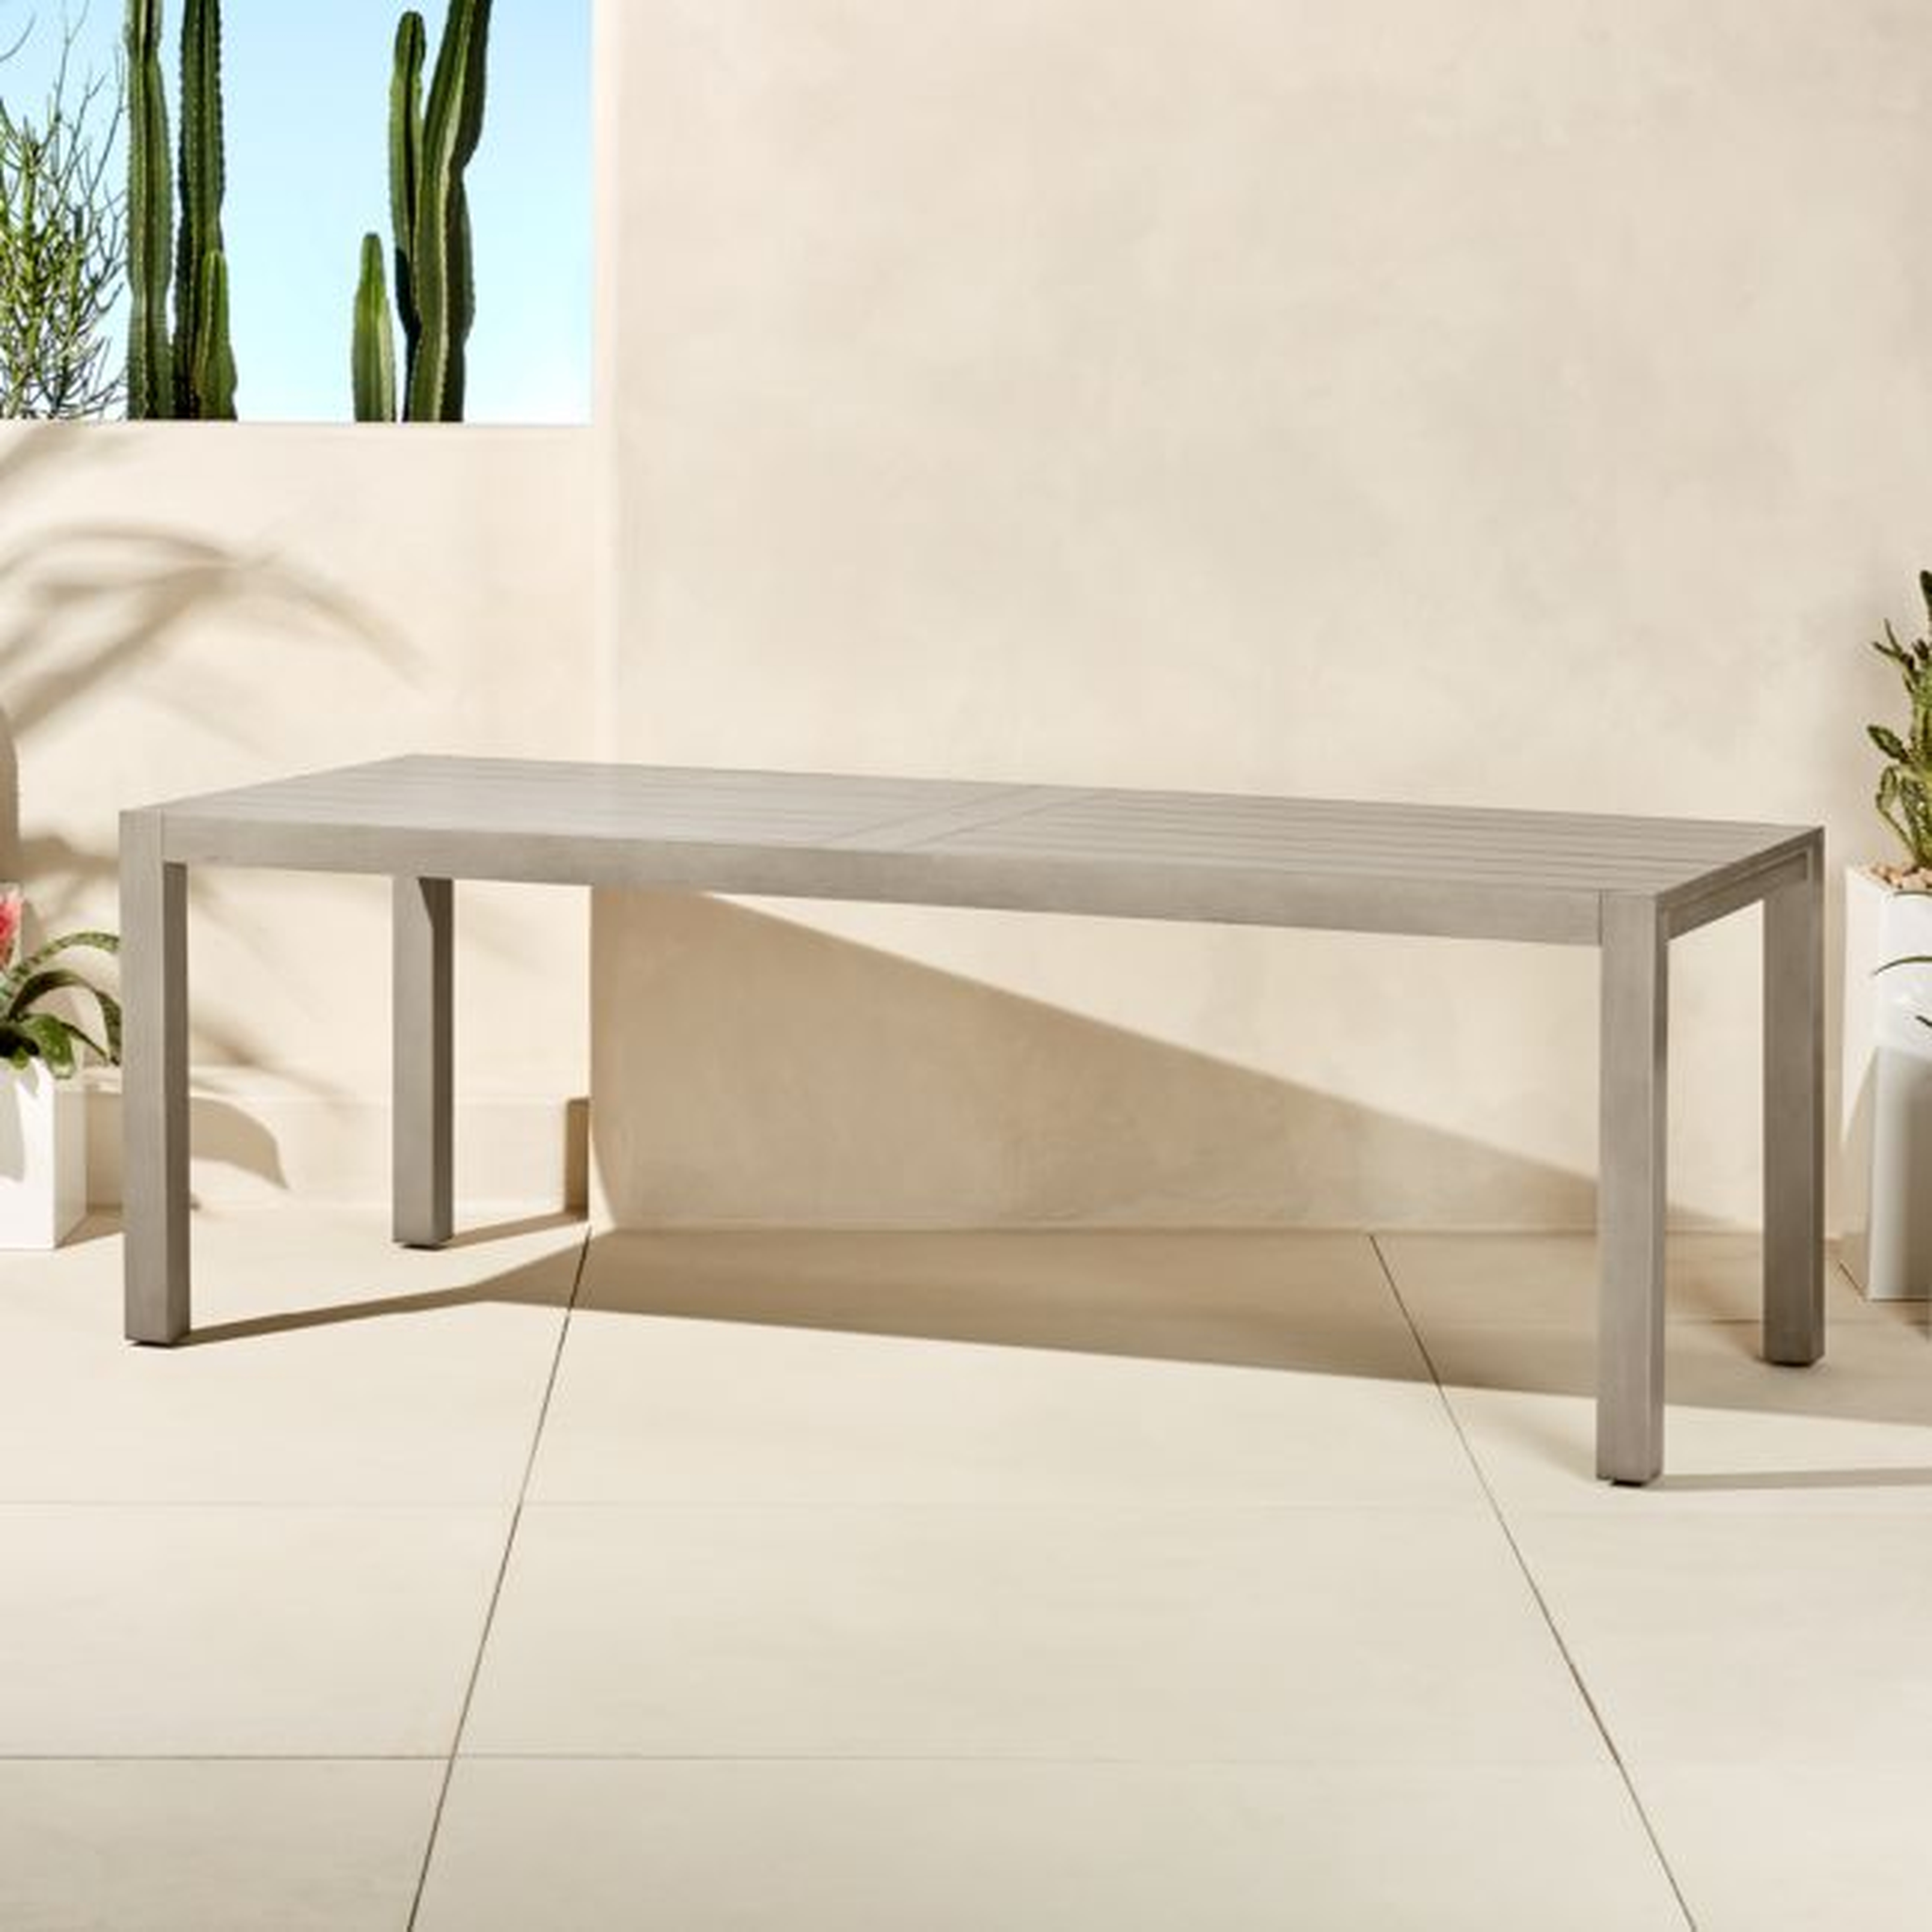 Matera Large Grey Outdoor Dining Table - CB2